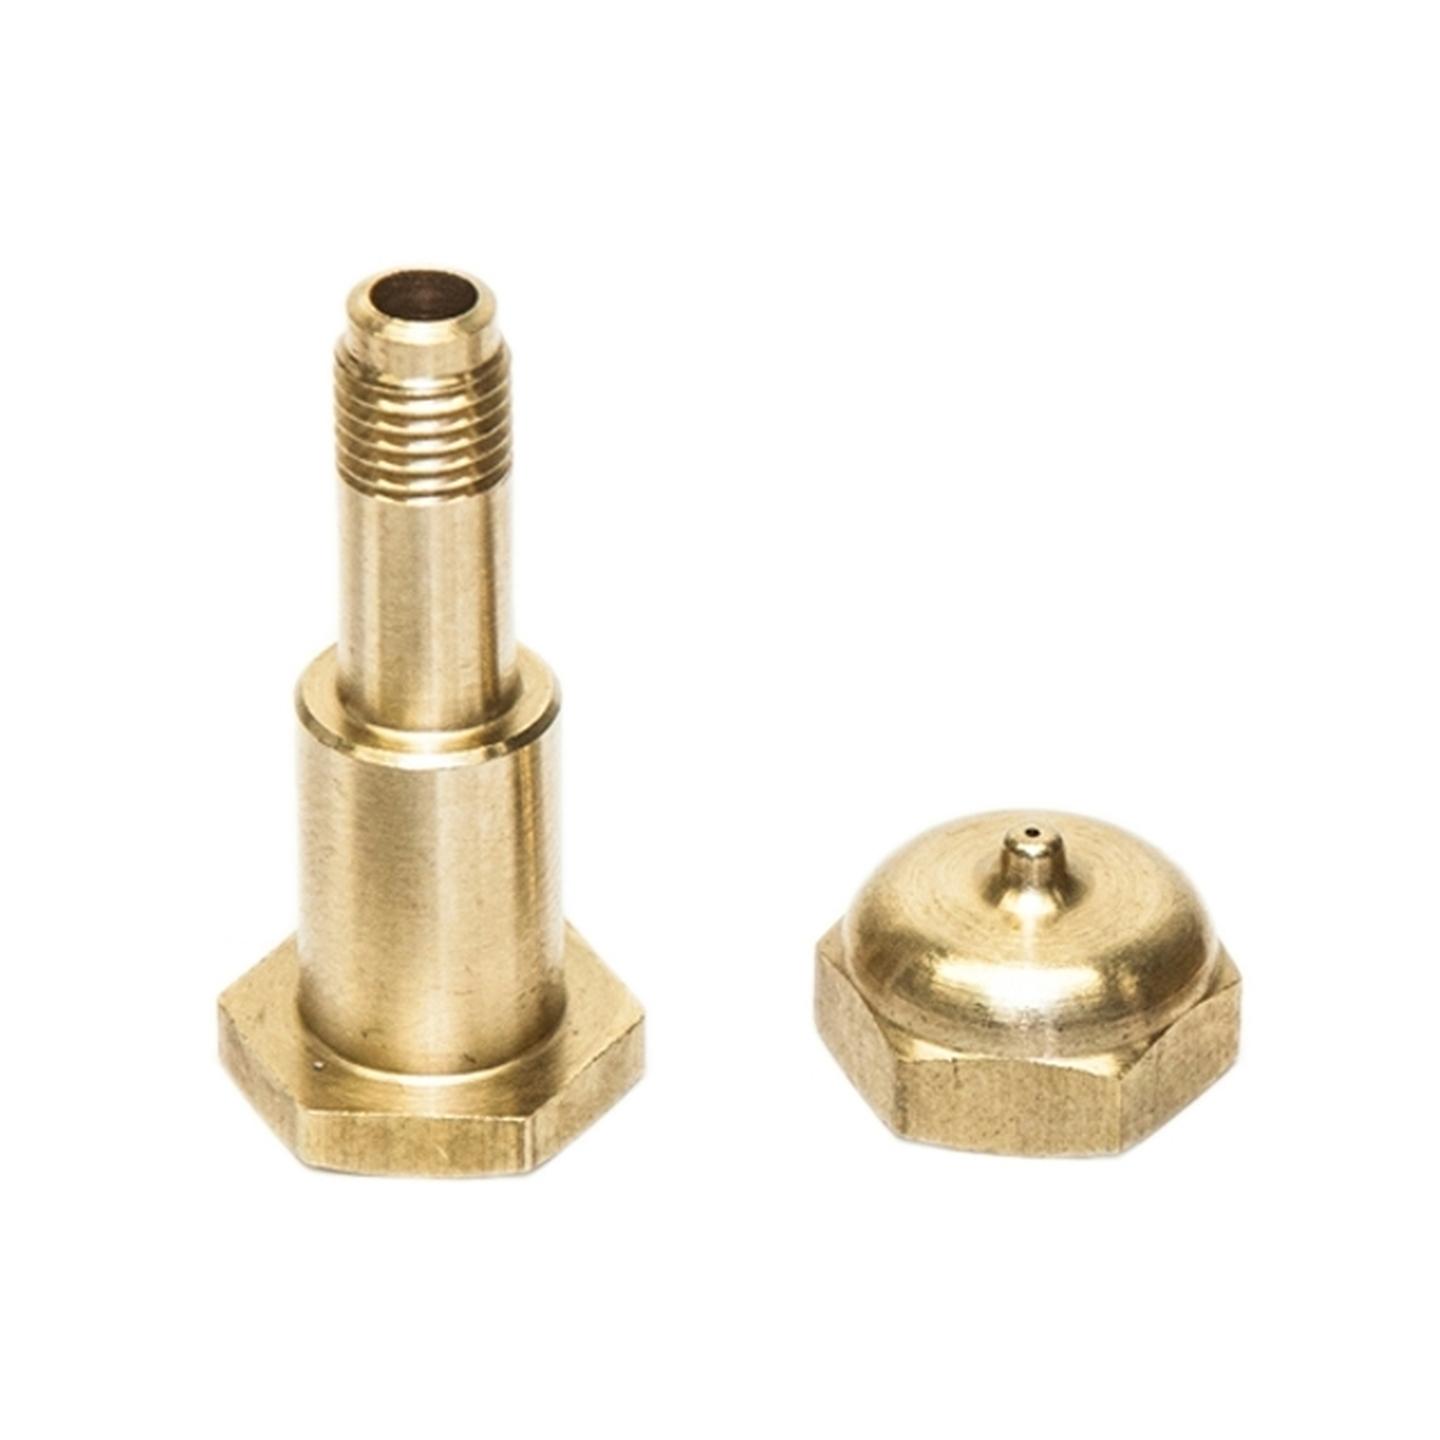 Spare Nozzle Assembly for TL-4020 3D Printer